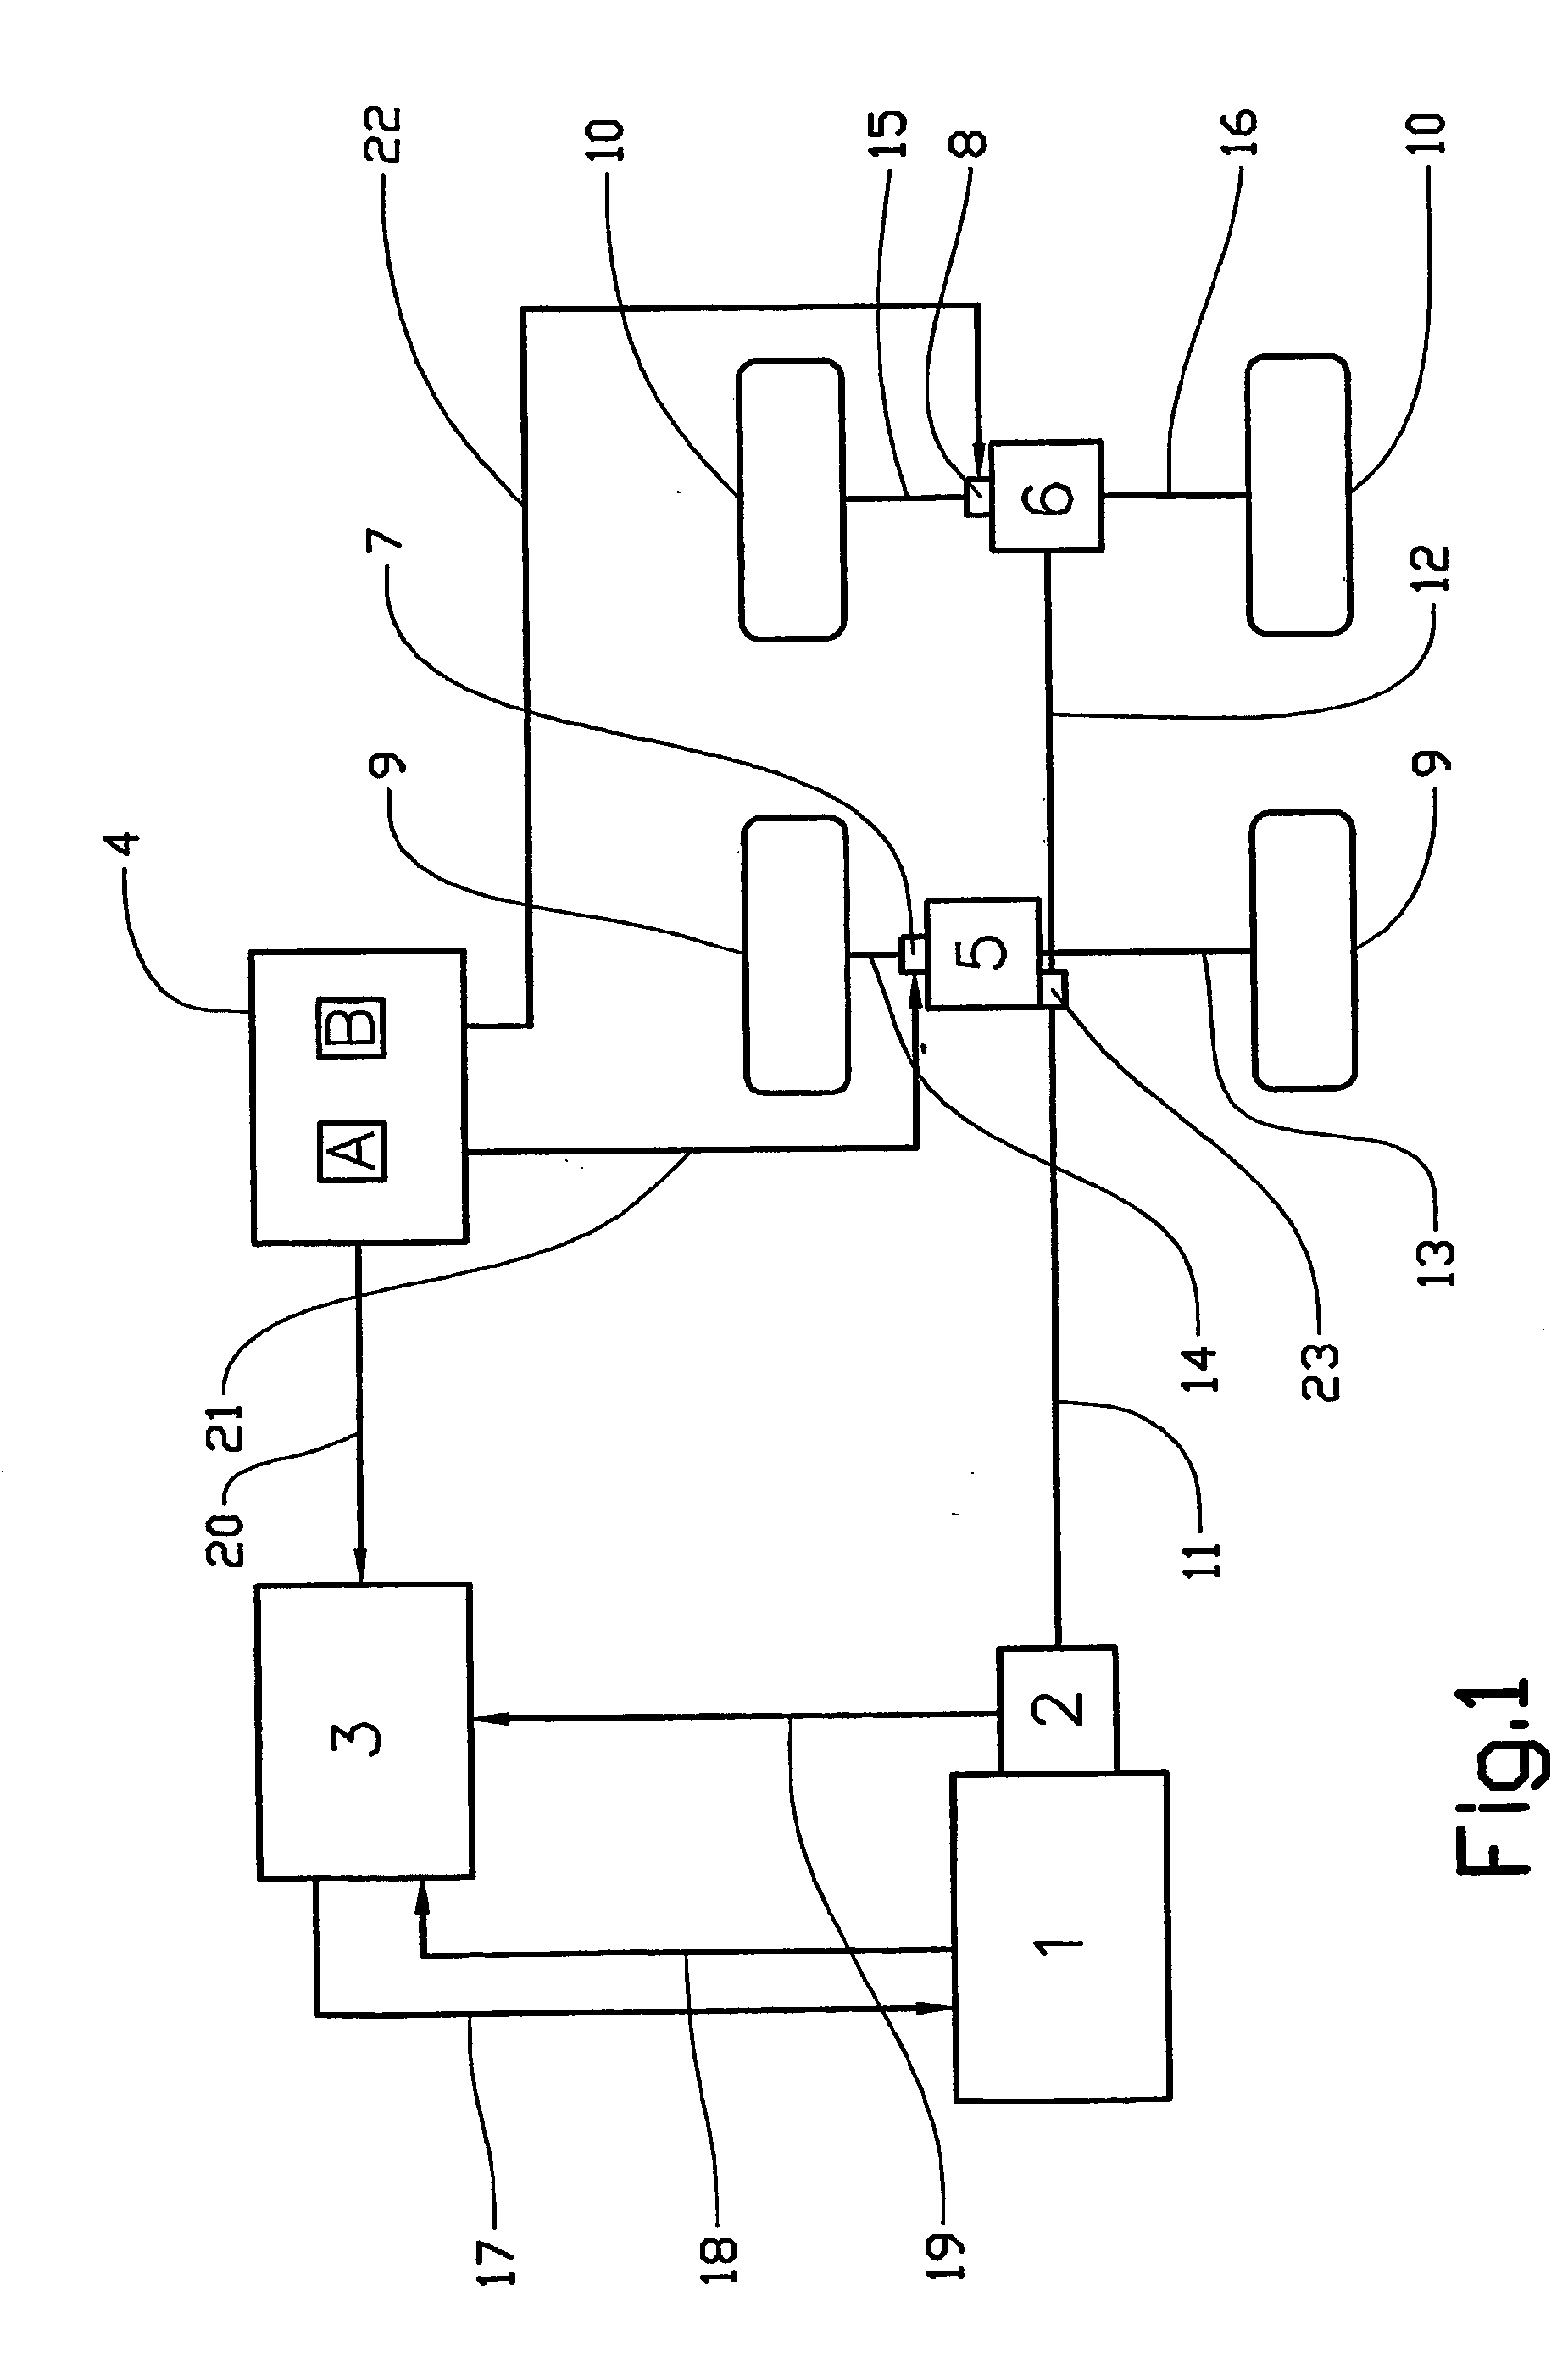 Device for engine-driven goods vehicle